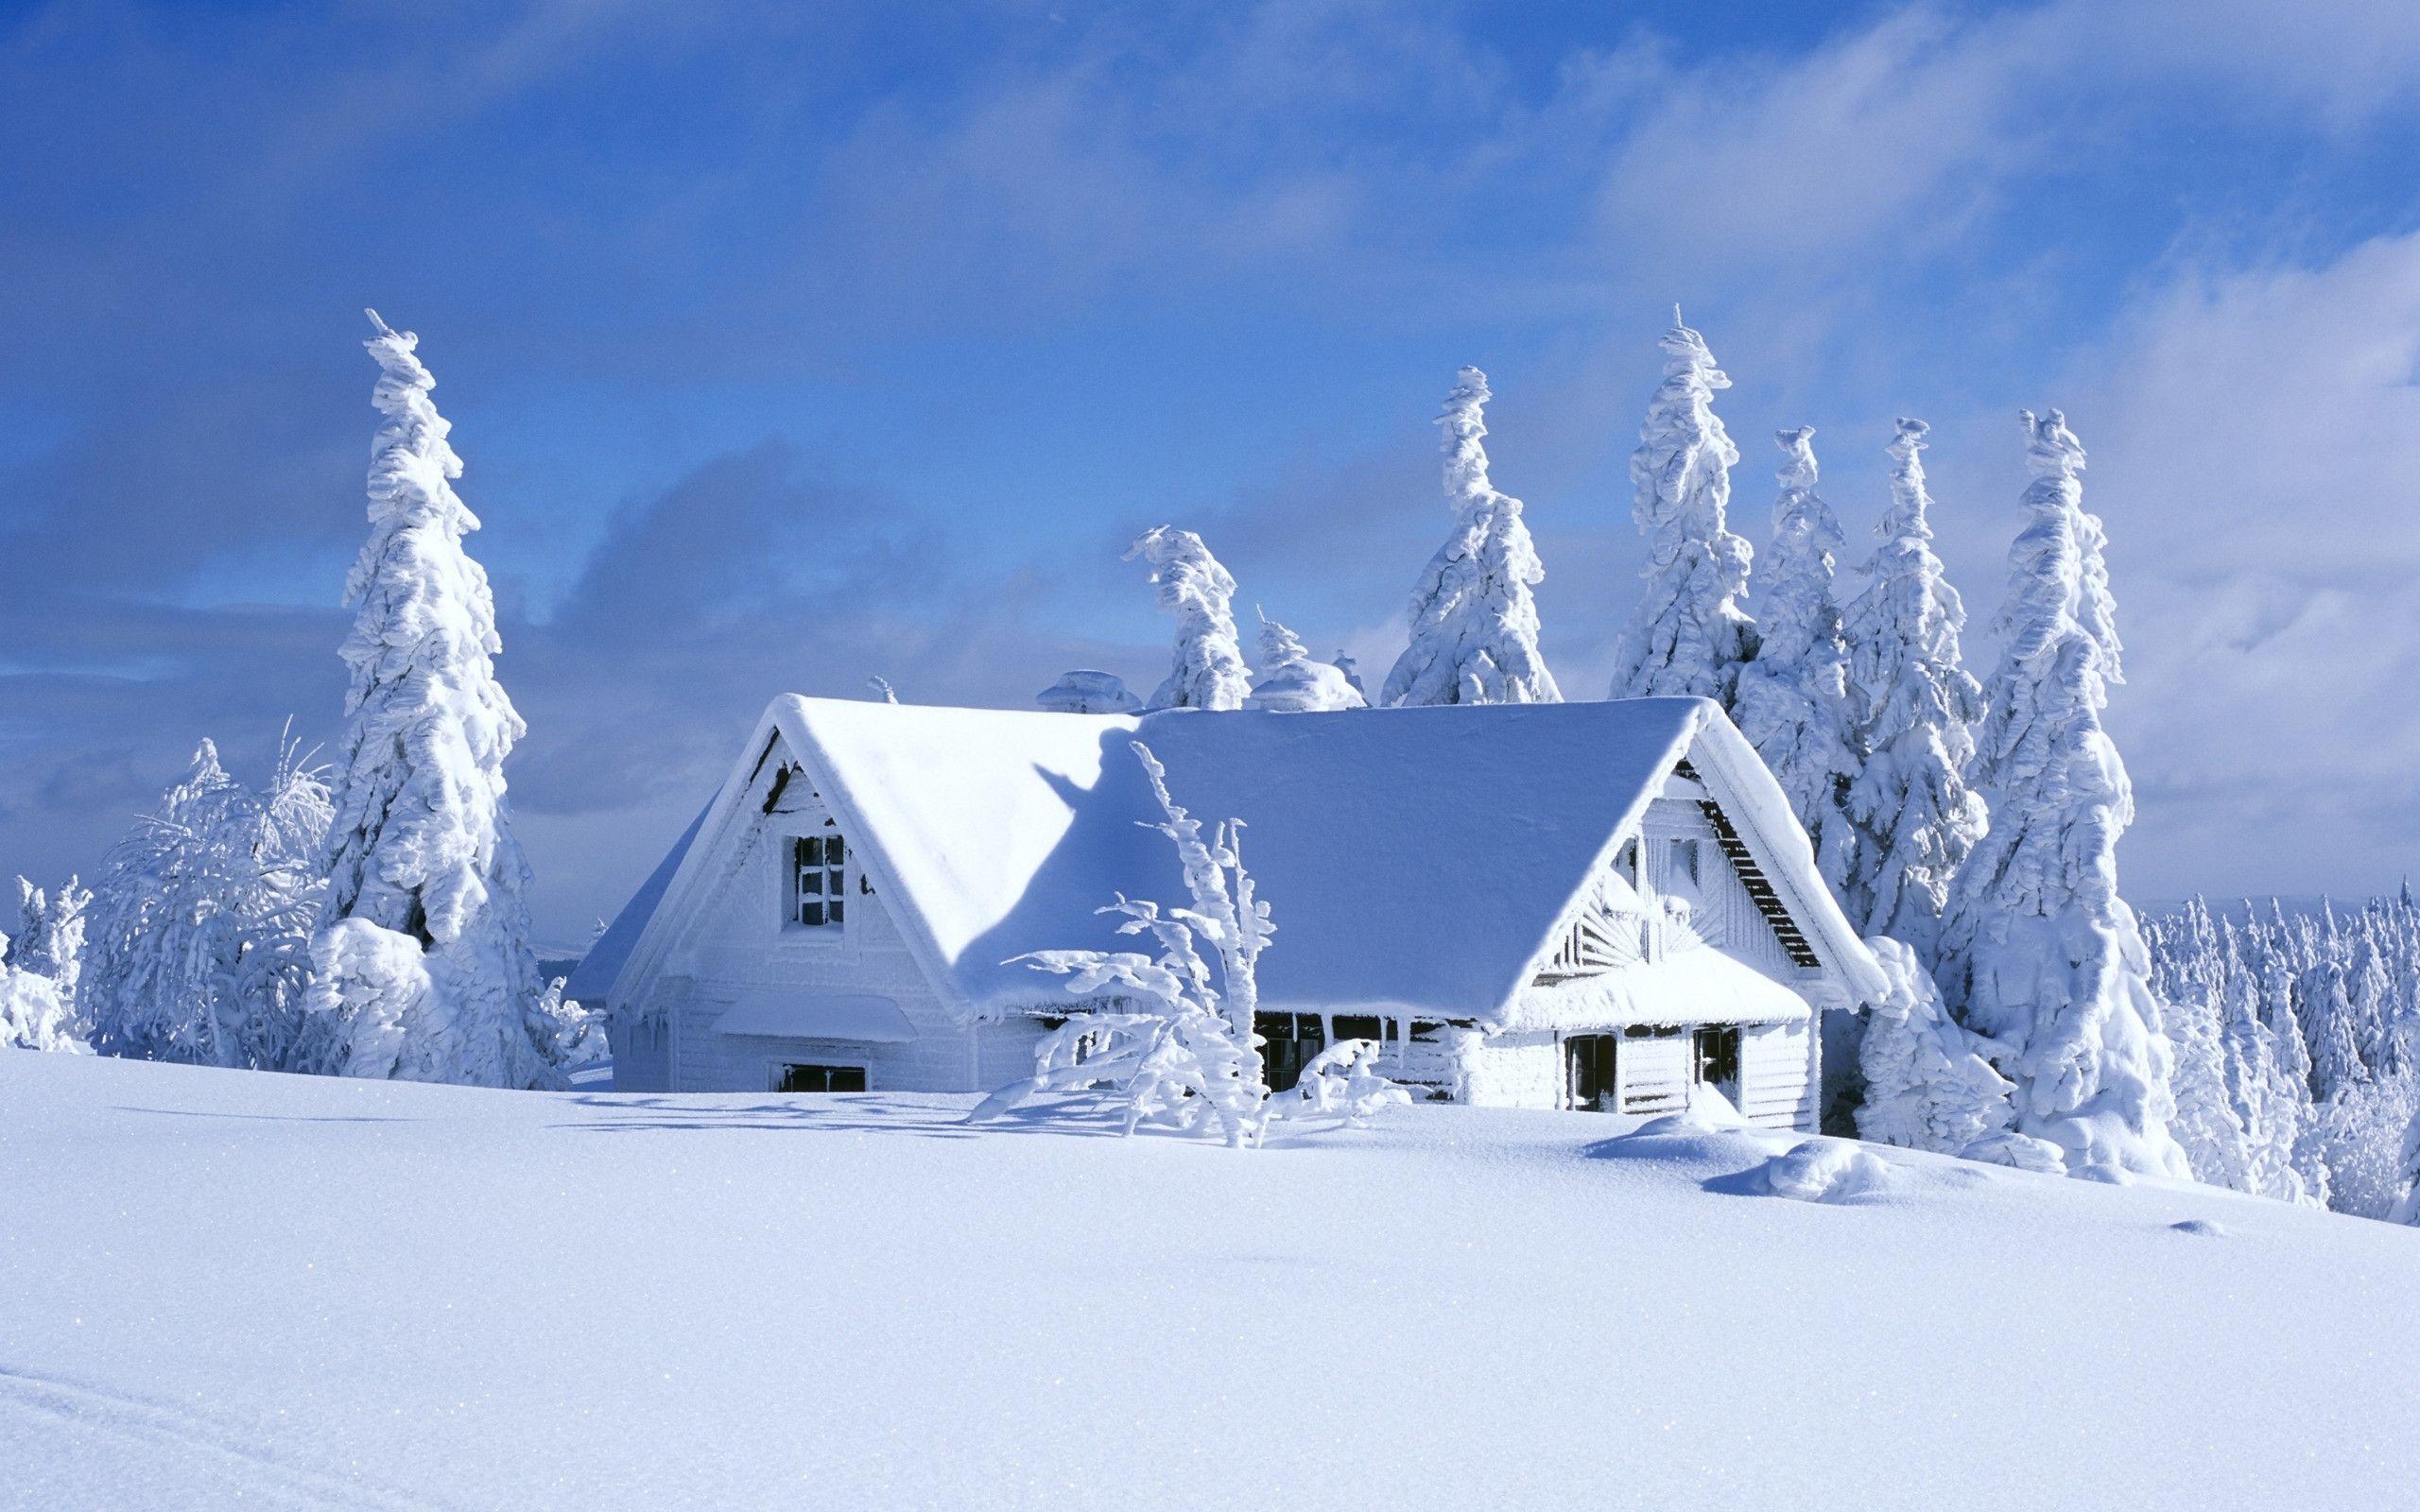 House Covered In Snow wallpaper. High Quality Wallpaper